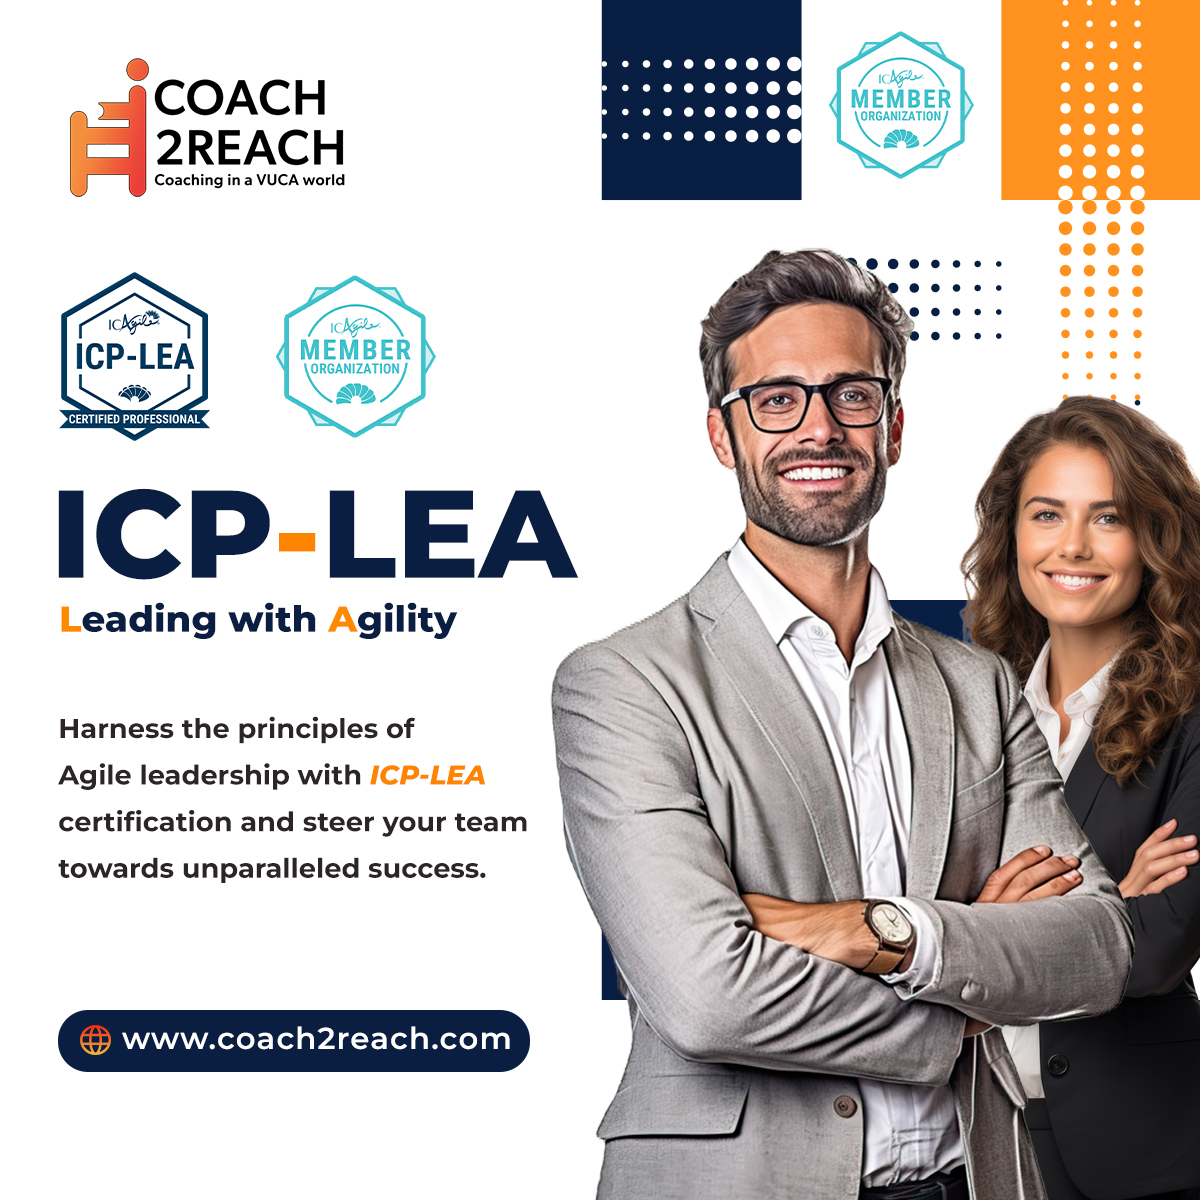 Elevate your leadership game with ICP-LEA certification! Unlock the secrets of Agile leadership and drive organizational transformation with confidence. Embrace change, inspire innovation, and lead your team to unparalleled success.
#ICPLEA #AgileLeadership #LeadershipDevelopment